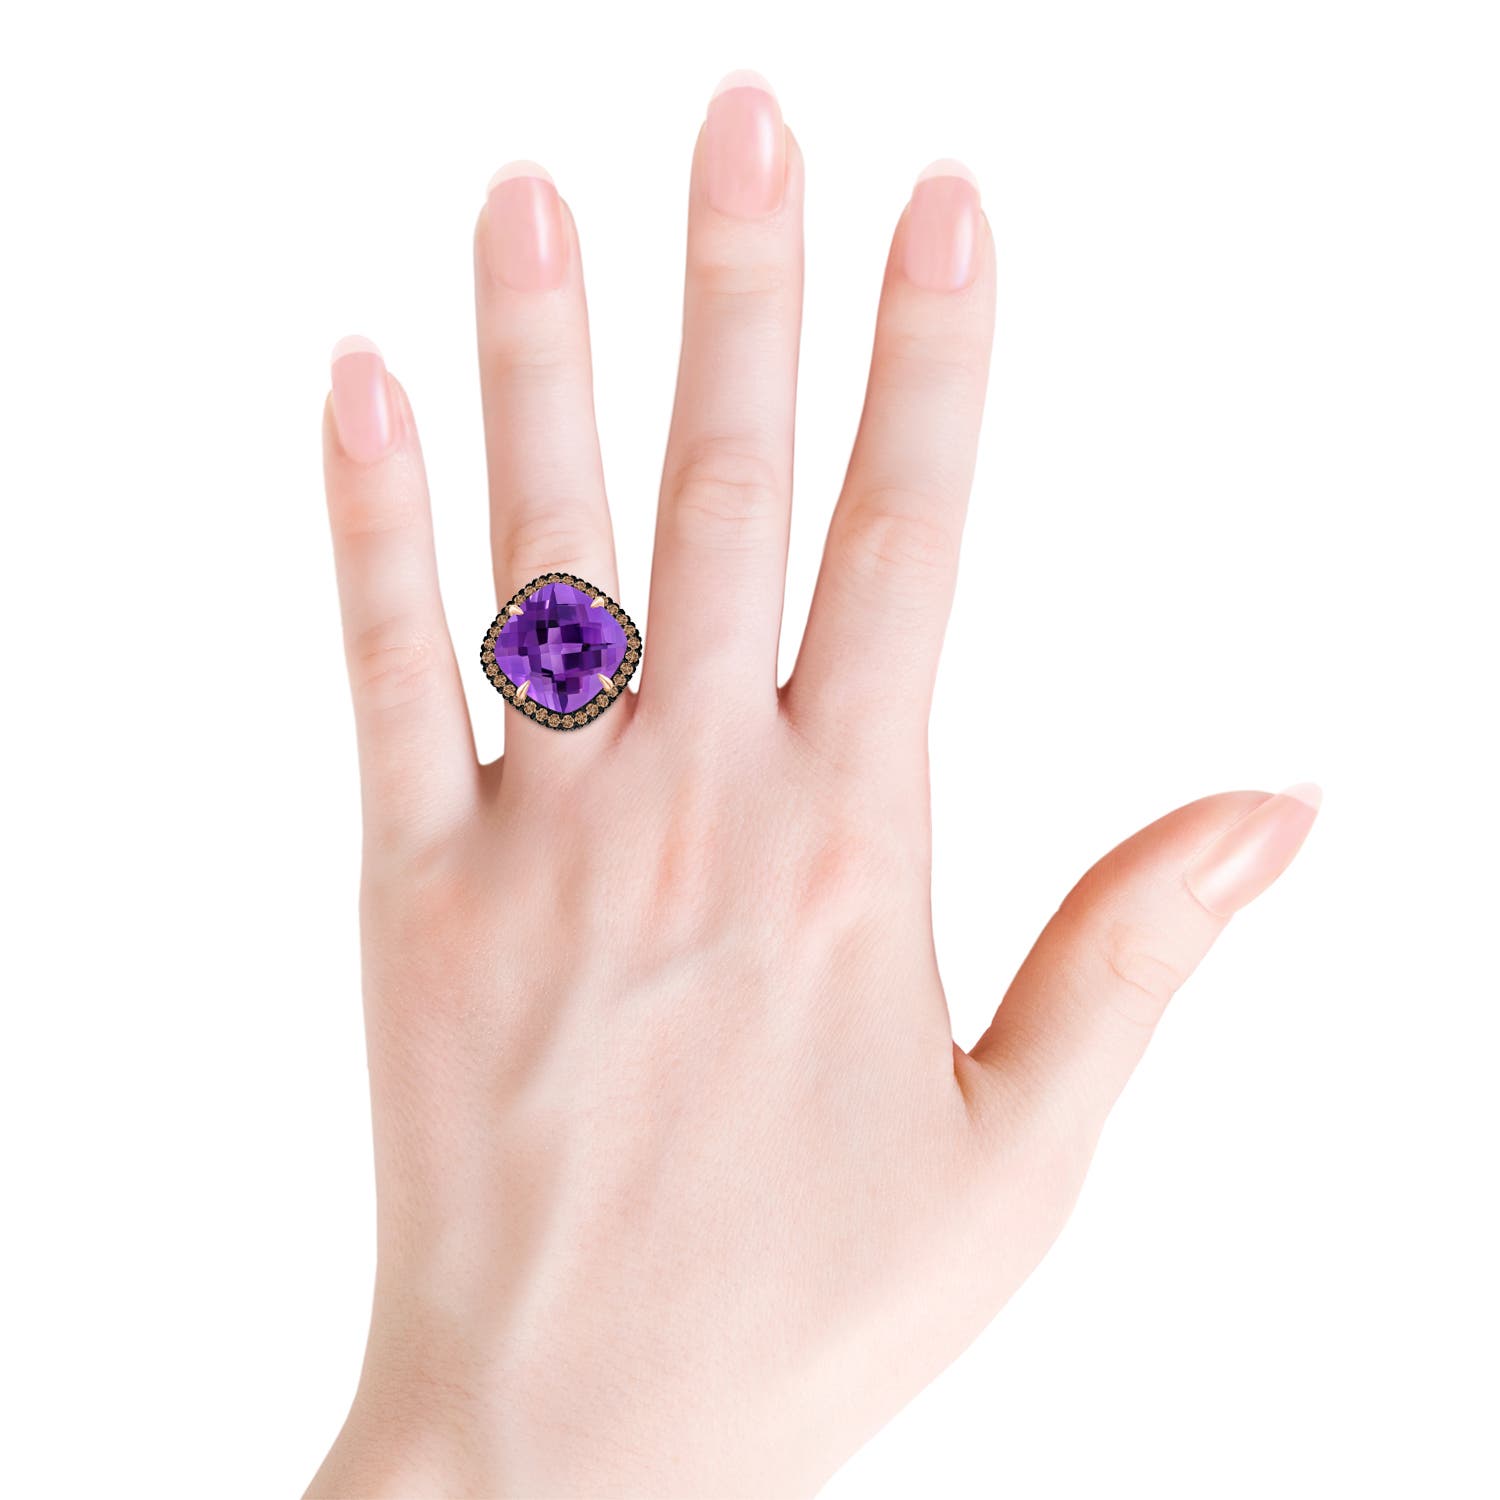 AAA - Amethyst / 14.08 CT / 14 KT Rose Gold